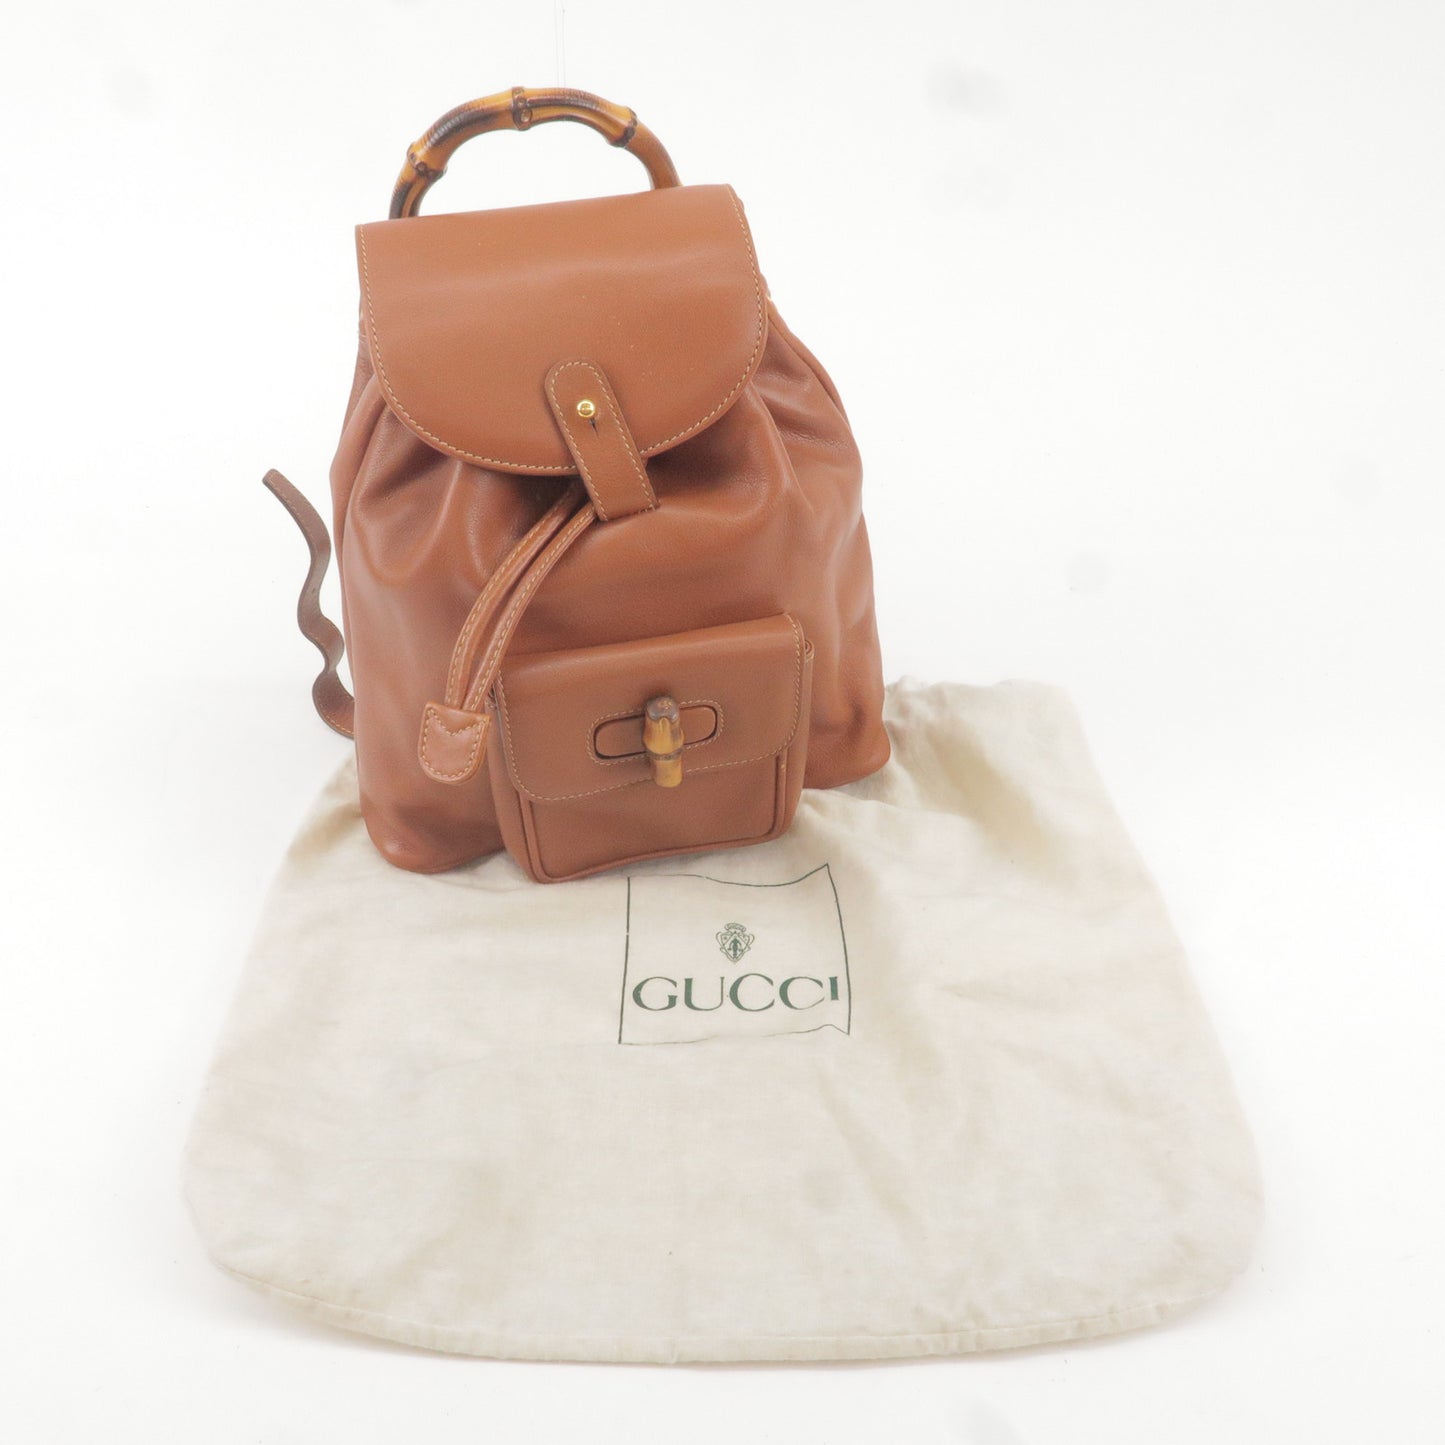 GUCCI Bamboo Leather Back Pack Ruck Sack Bag Brown 003.1705